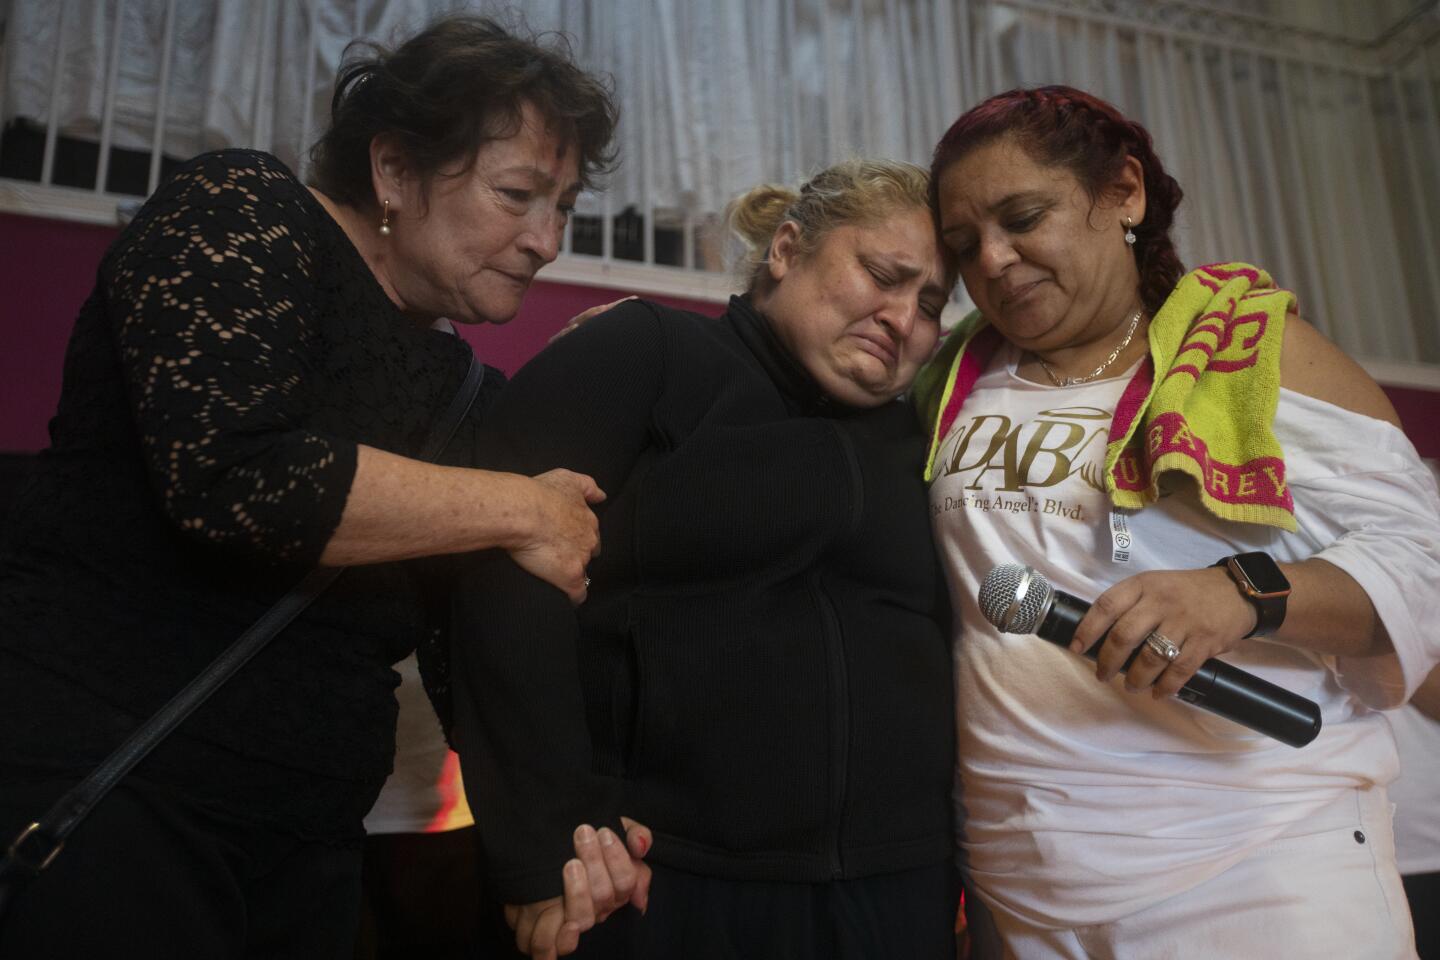 Grandmother Betzabe Vargas Fabes, 58, left, mother Lorena Pimentel de Salazar, middle, and Rocio Caetano, right, at a fundraising Zumba class in San Jose.